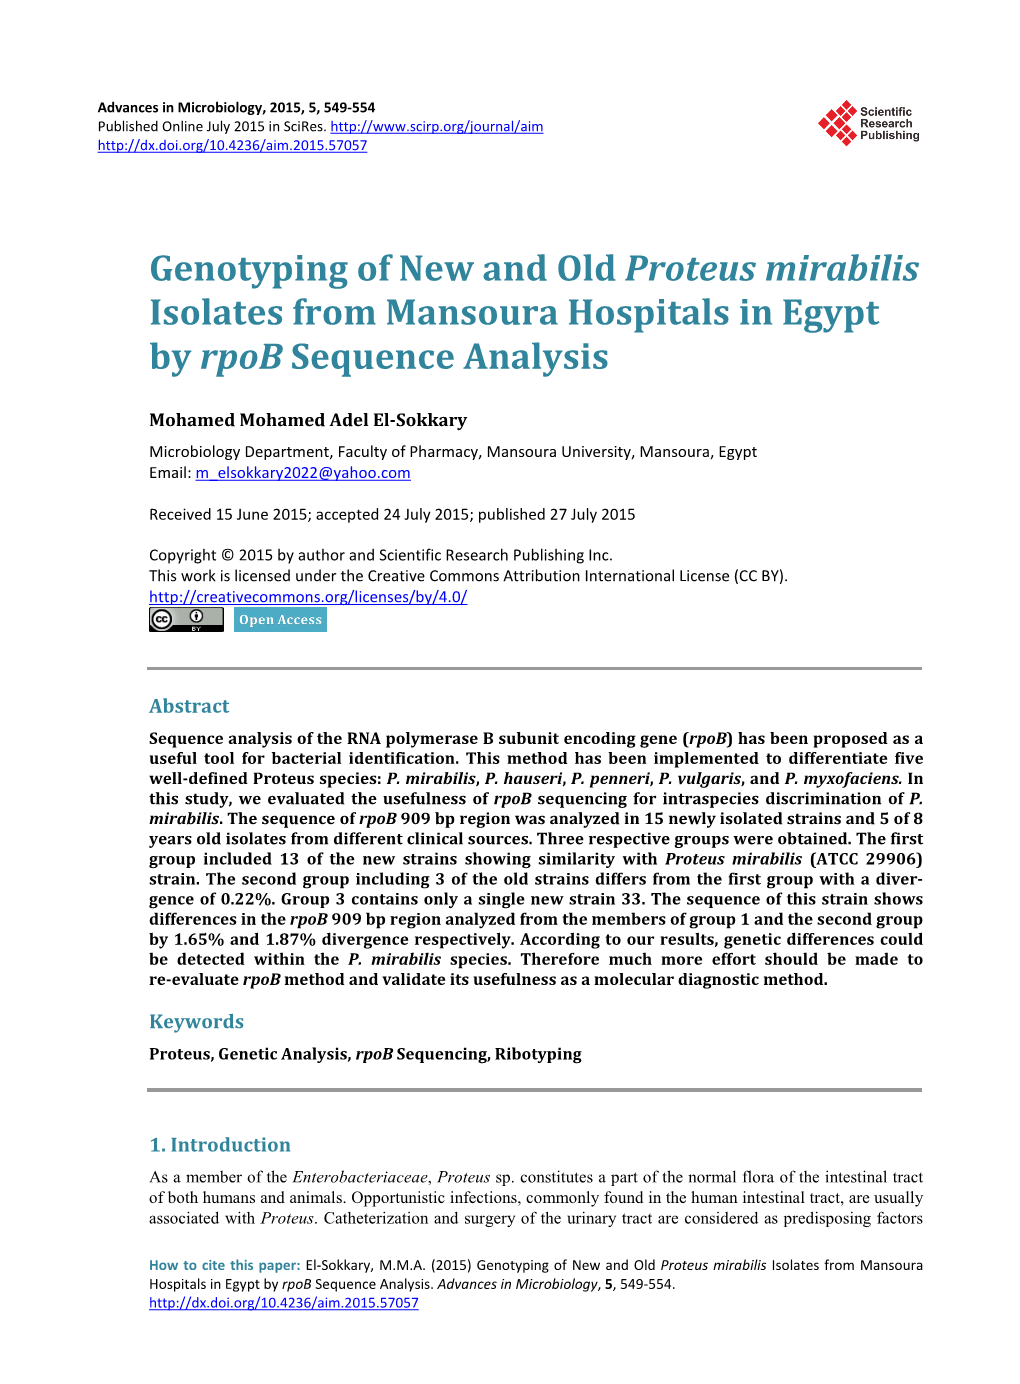 Genotyping of New and Old Proteus Mirabilis Isolates from Mansoura Hospitals in Egypt by Rpob Sequence Analysis